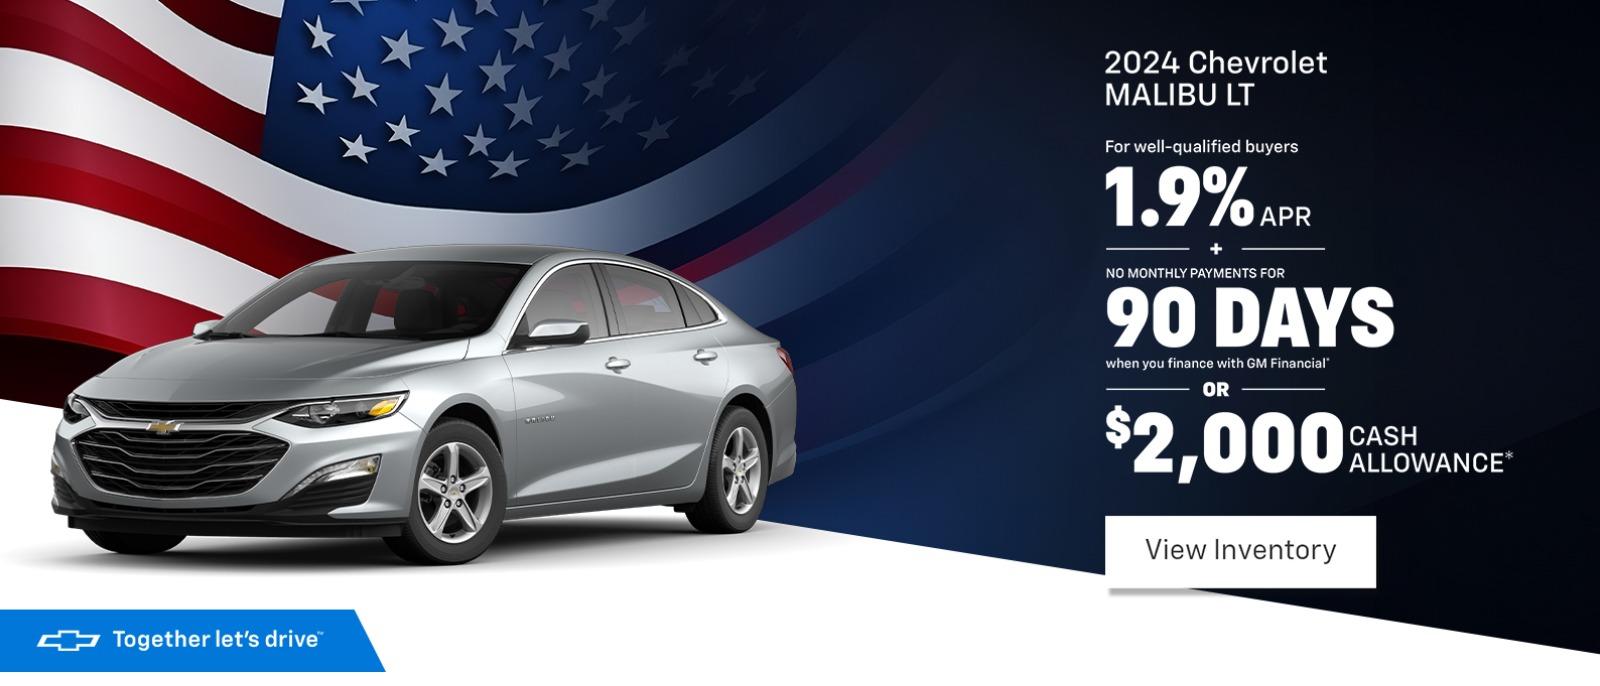 2024 Chevrolet MALIBU LT For well-qualified buyers 1.9% APR NO MONTHLY PAYMENTS FOR 90 DAYS when you finance with GM Financial OR $2,000 CASH ALLOWANCE*